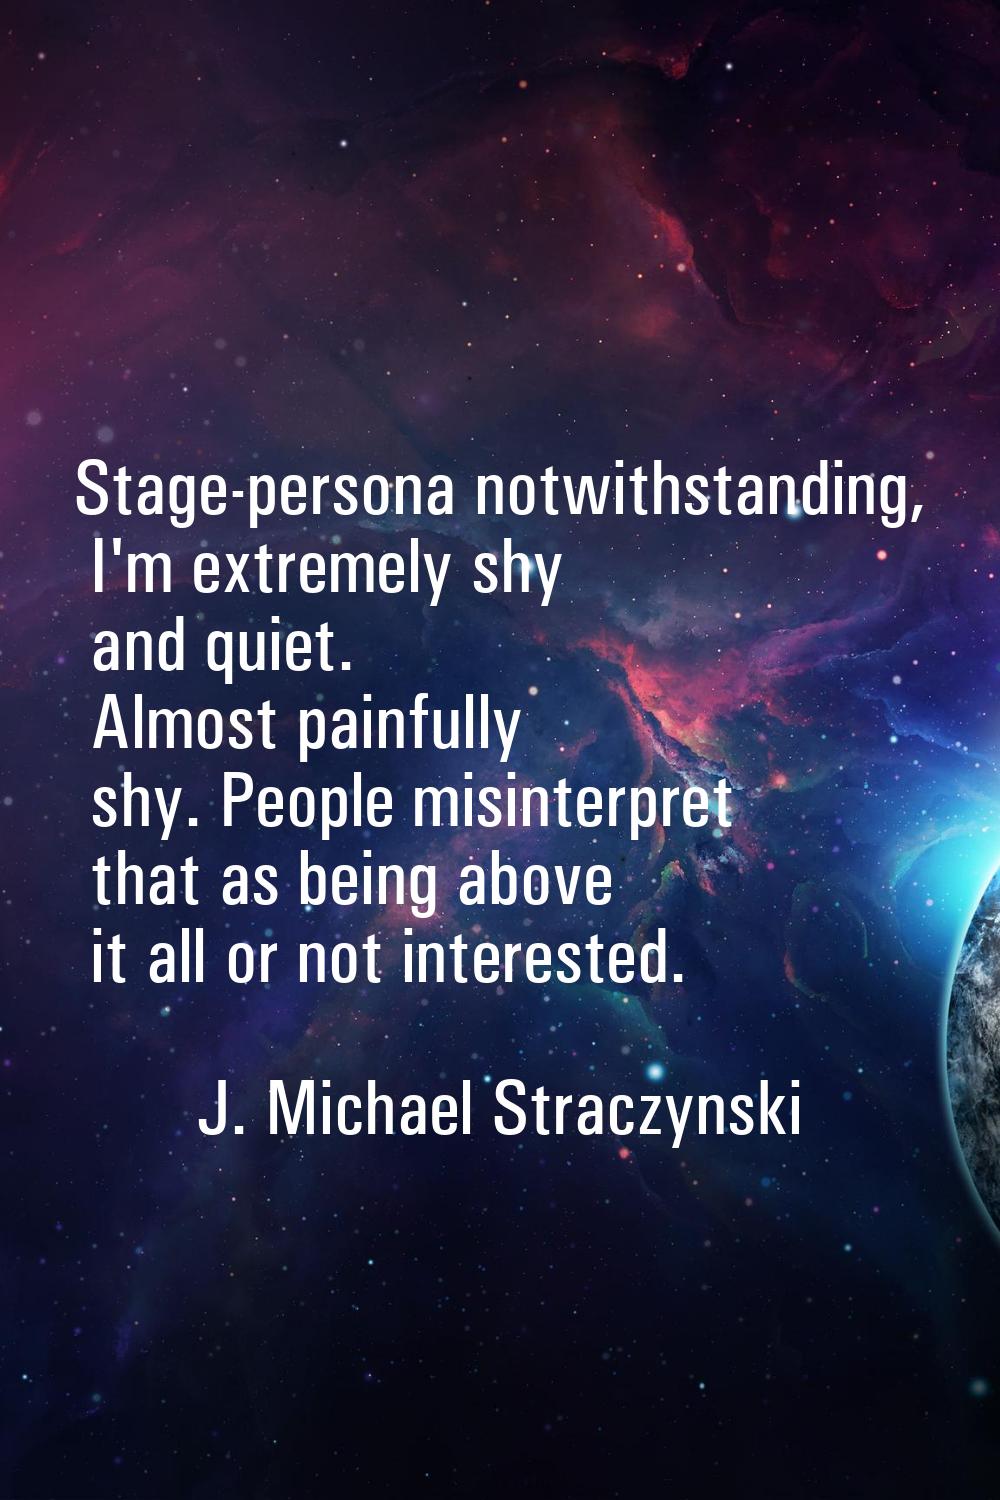 Stage-persona notwithstanding, I'm extremely shy and quiet. Almost painfully shy. People misinterpr